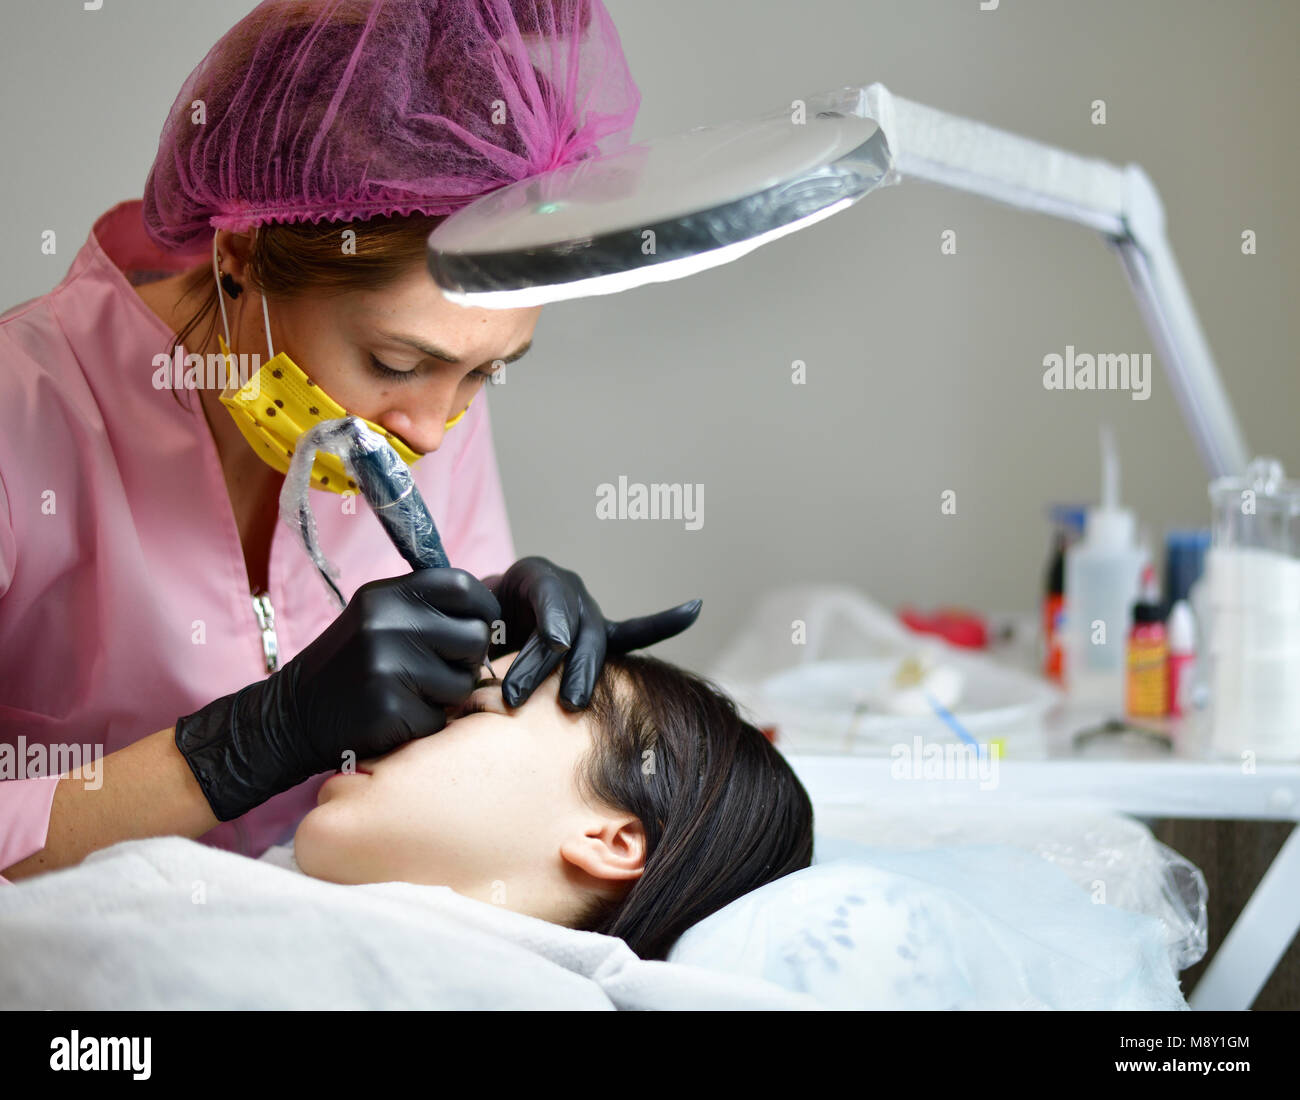 cosmetologist does hardware skin care for girl's face Stock Photo